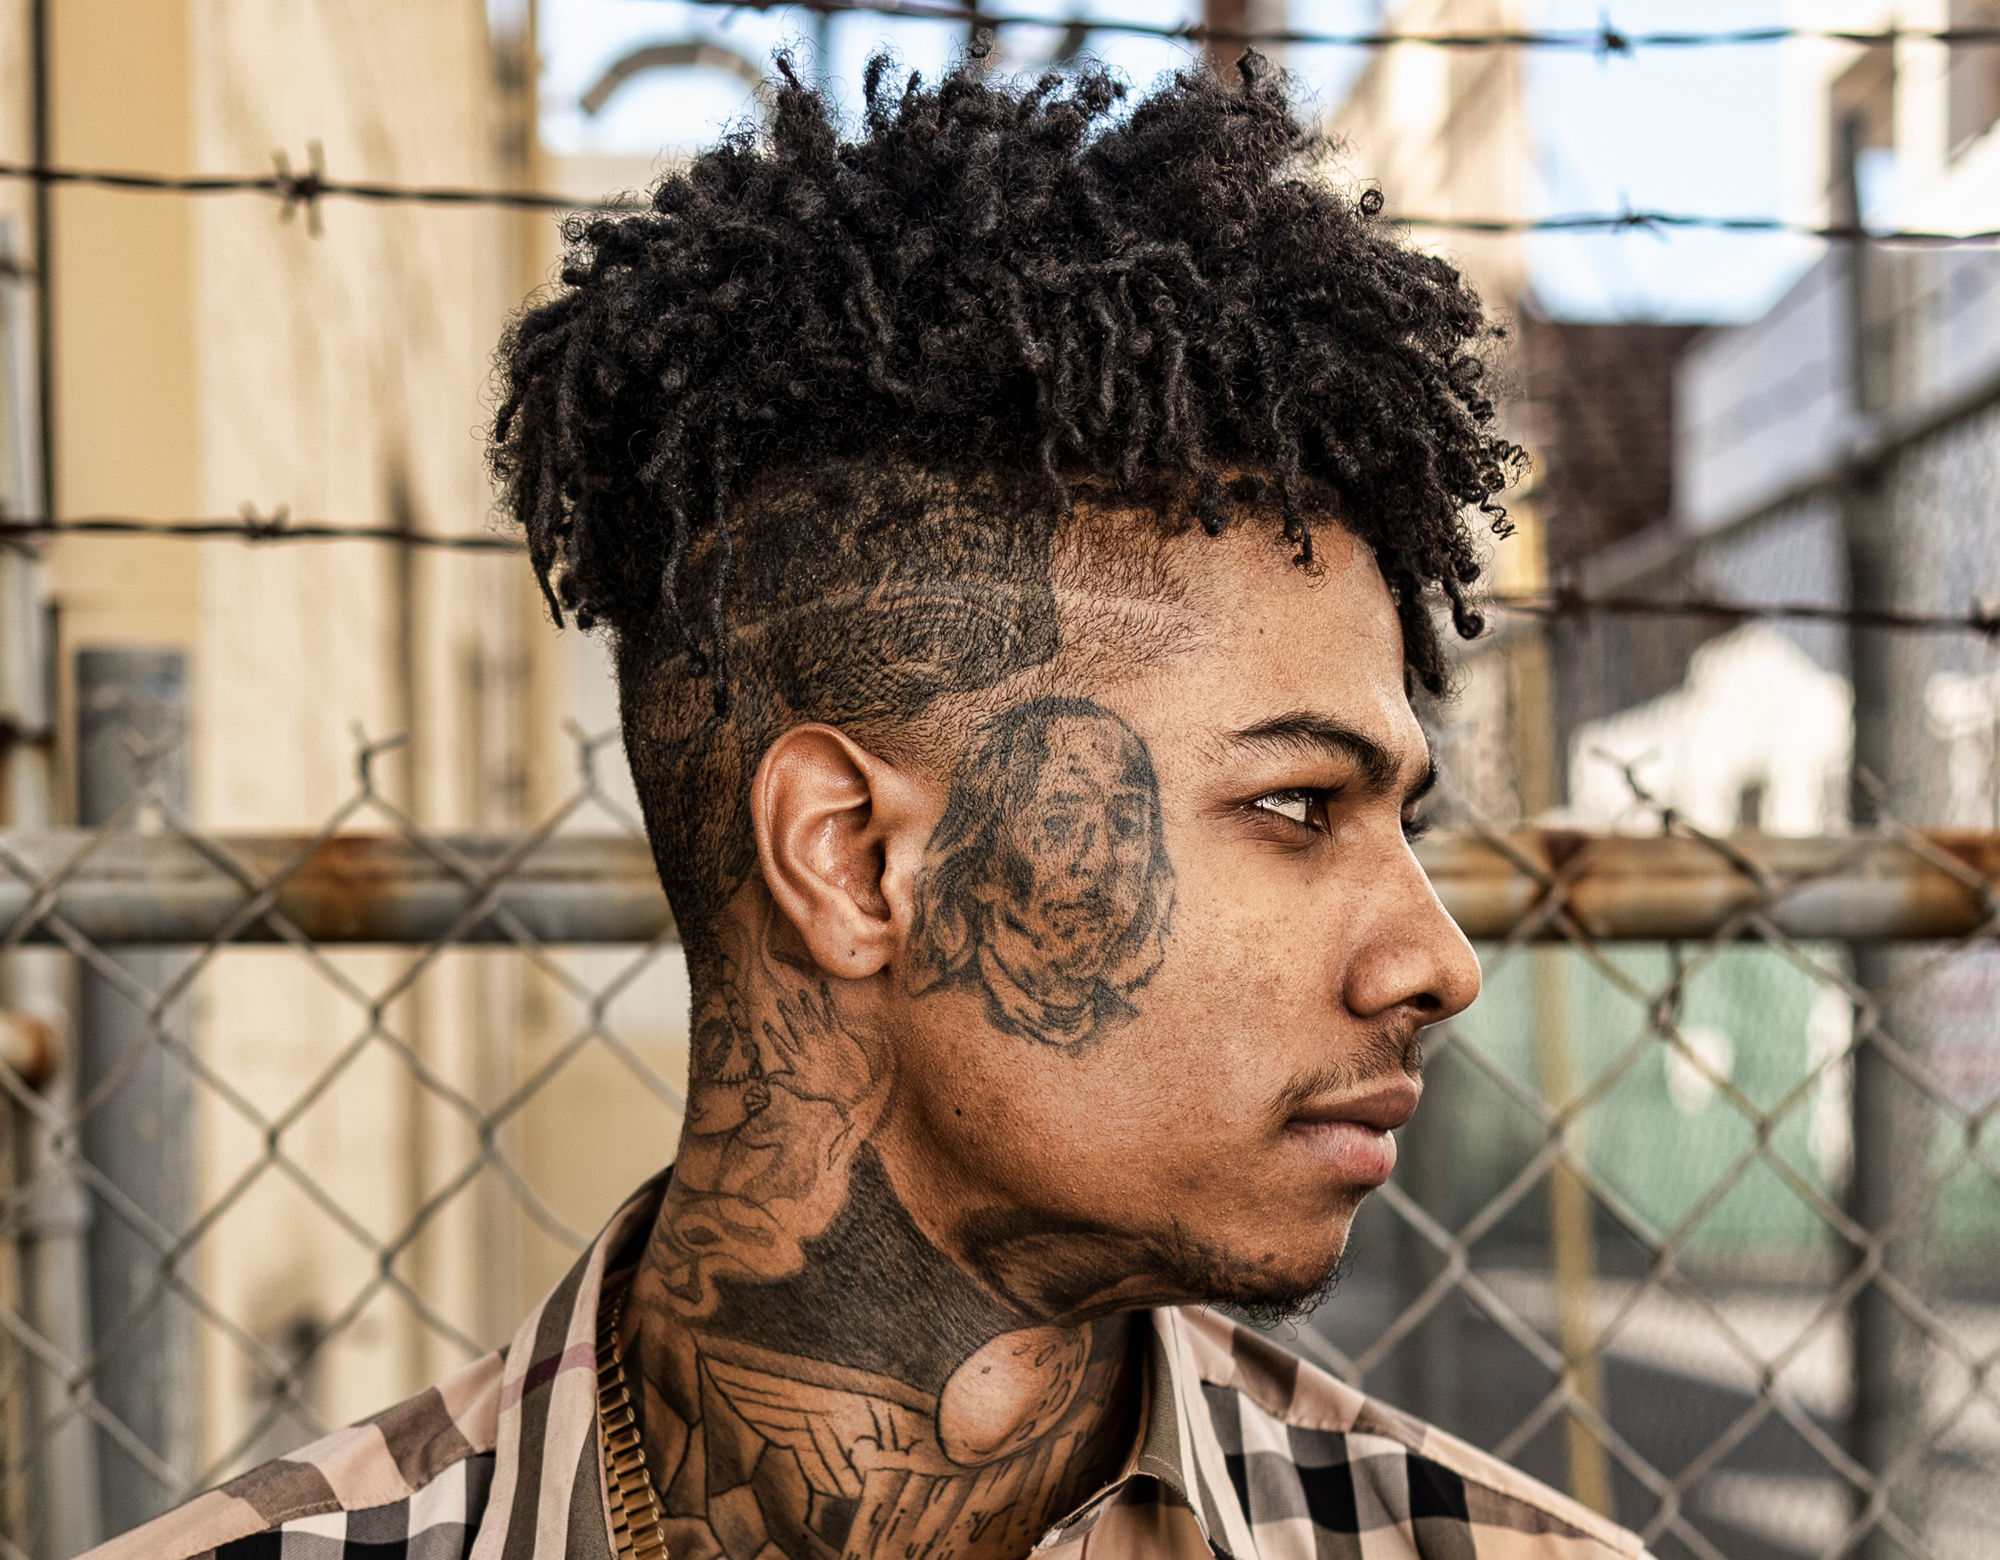 Blueface Responds To NLE Choppa's Tattoo Of Chrisean Rock - YouTube